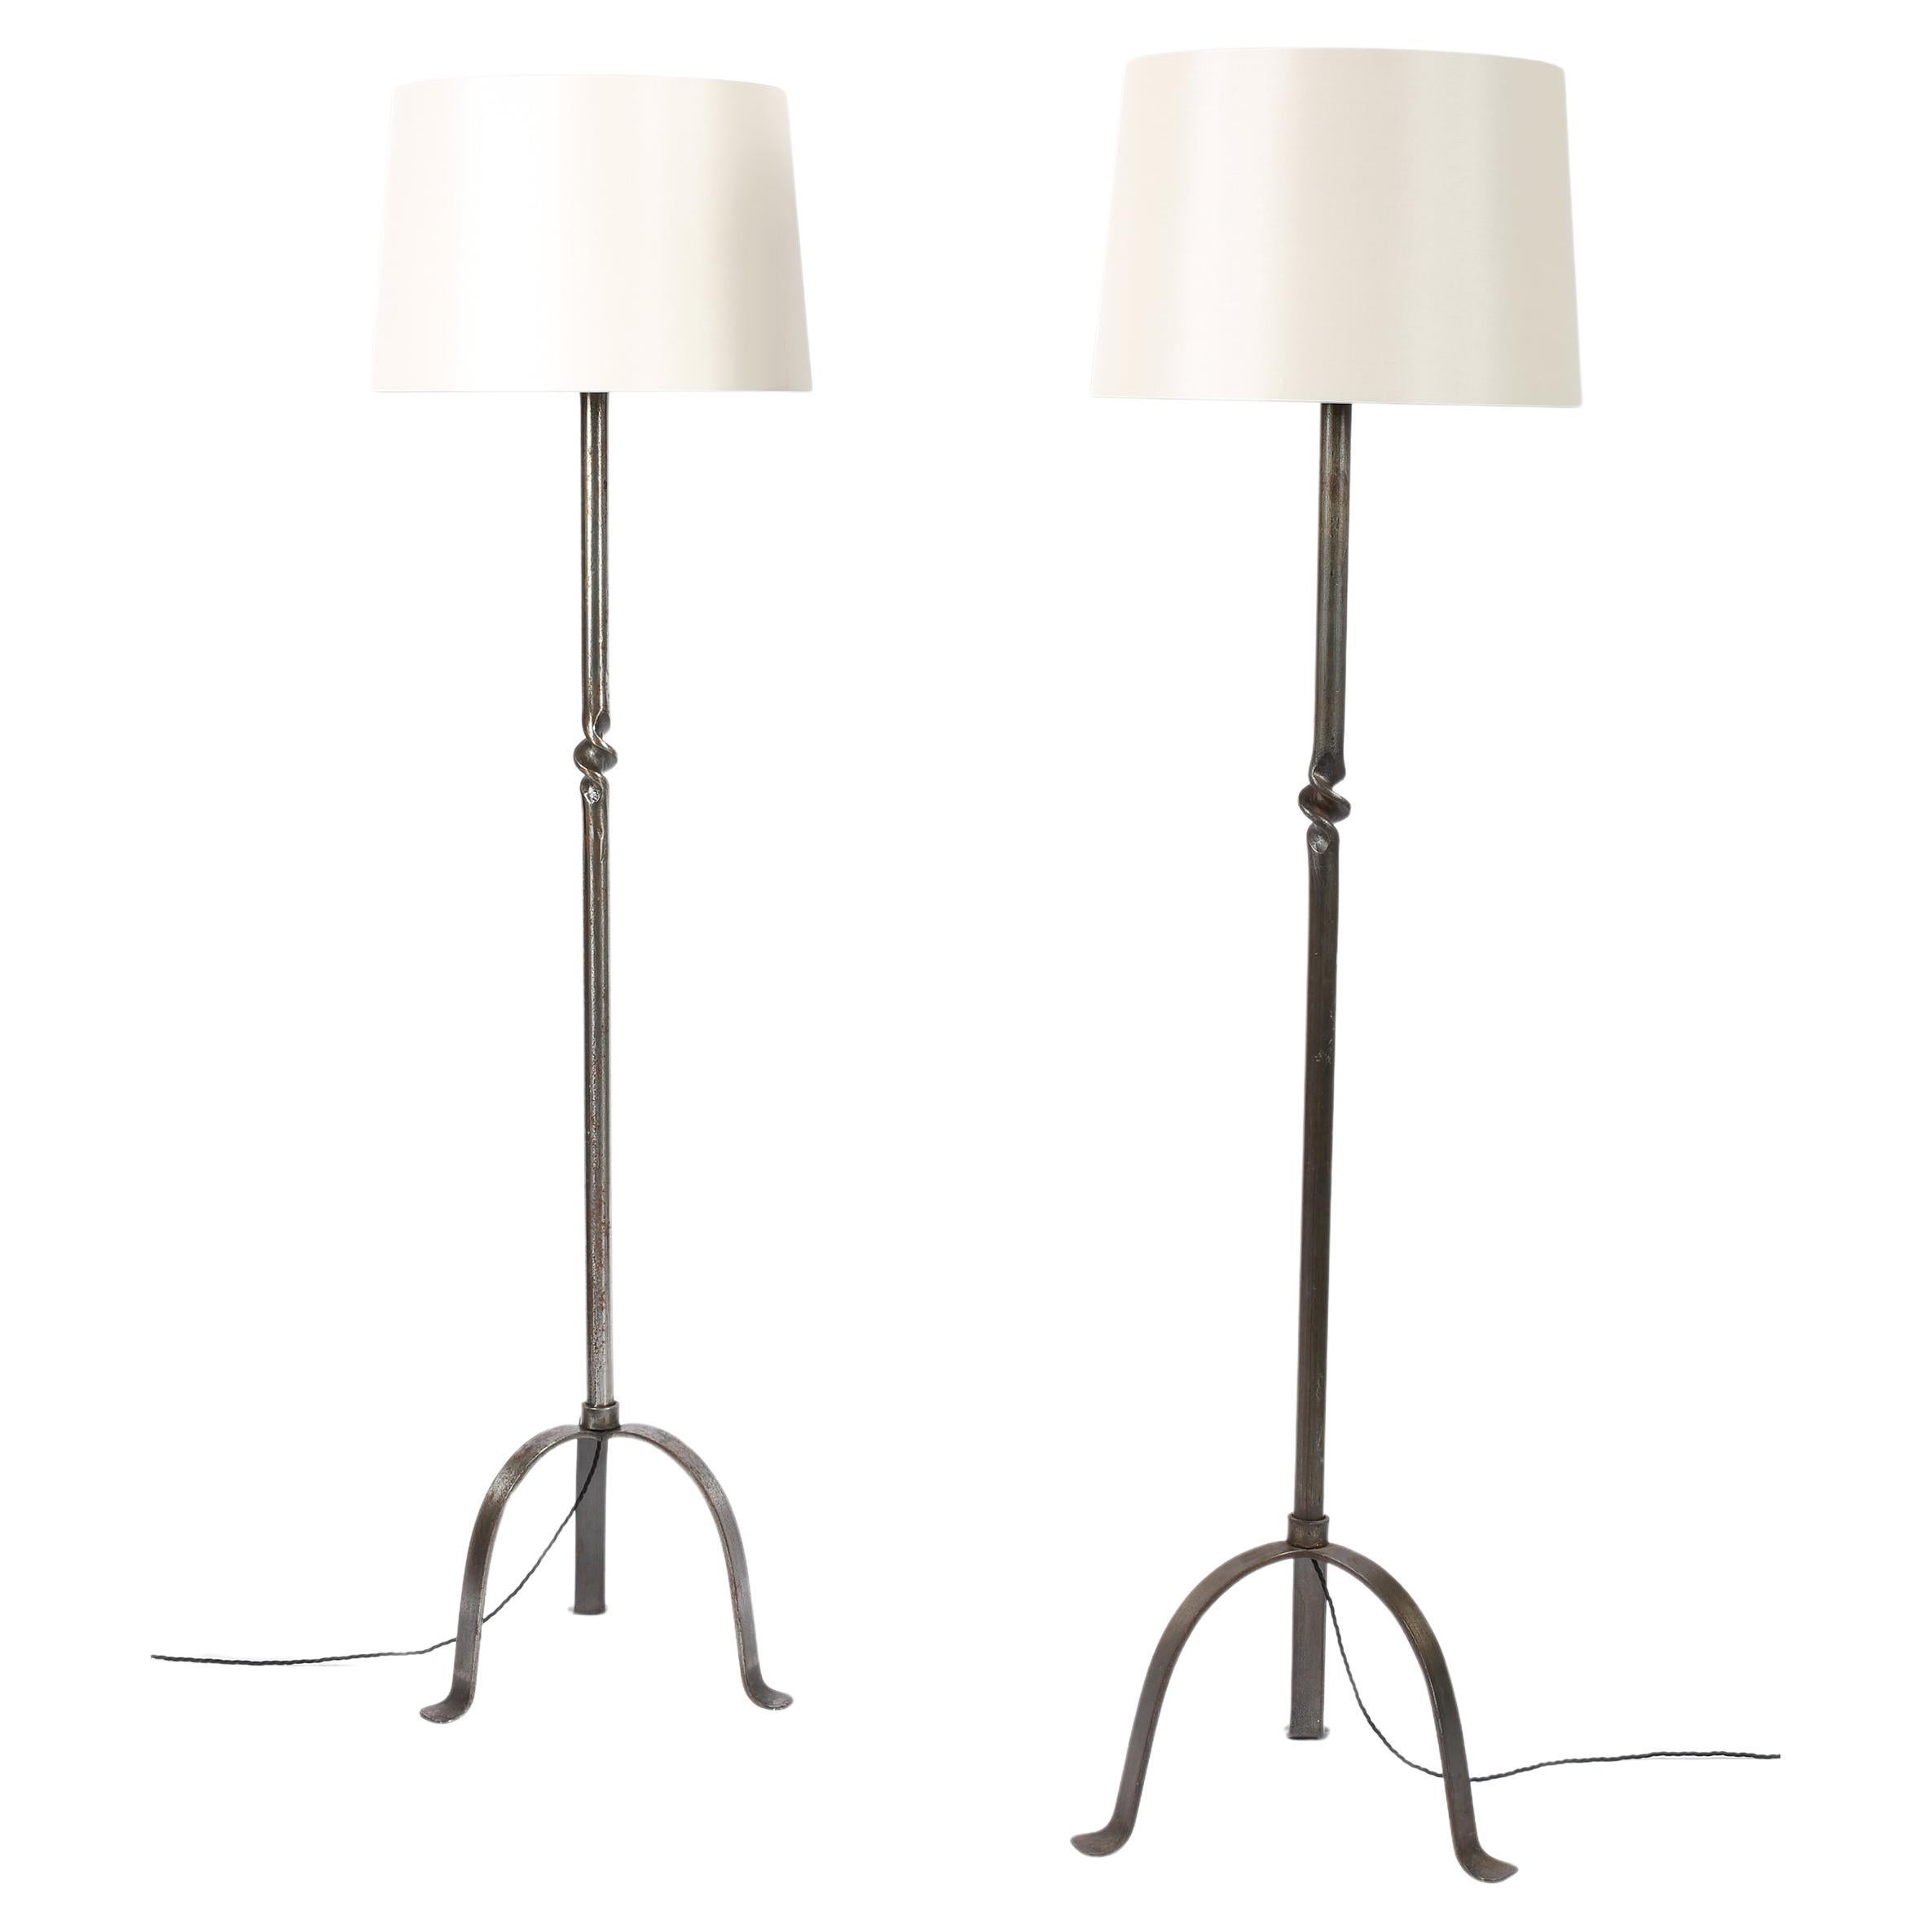 Pair of French Midcentury Forged Iron Torsade Floor Lamps